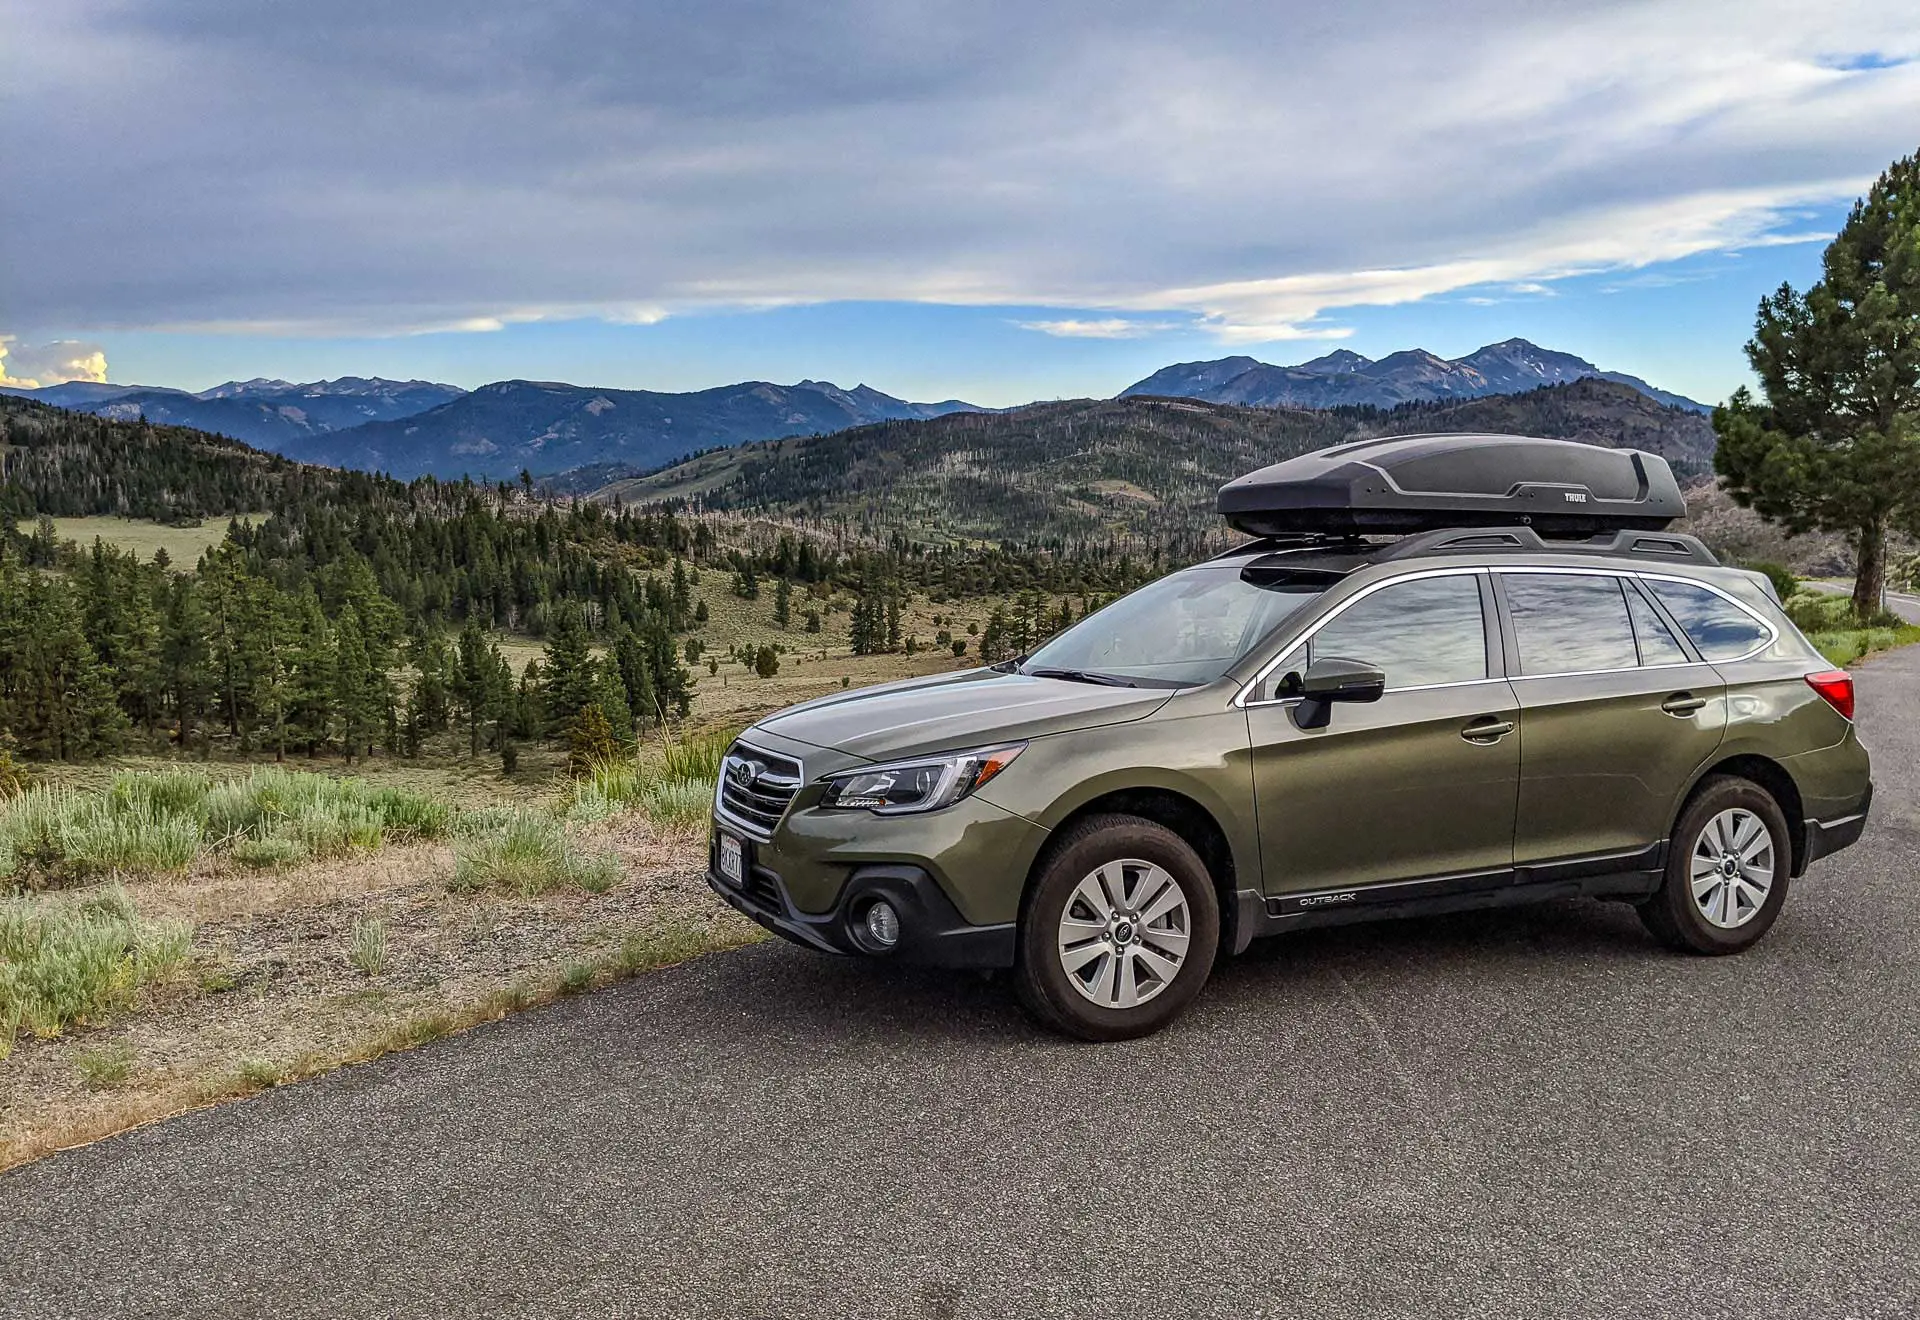 What is the Best Size Roof Box for a Subaru Outback?